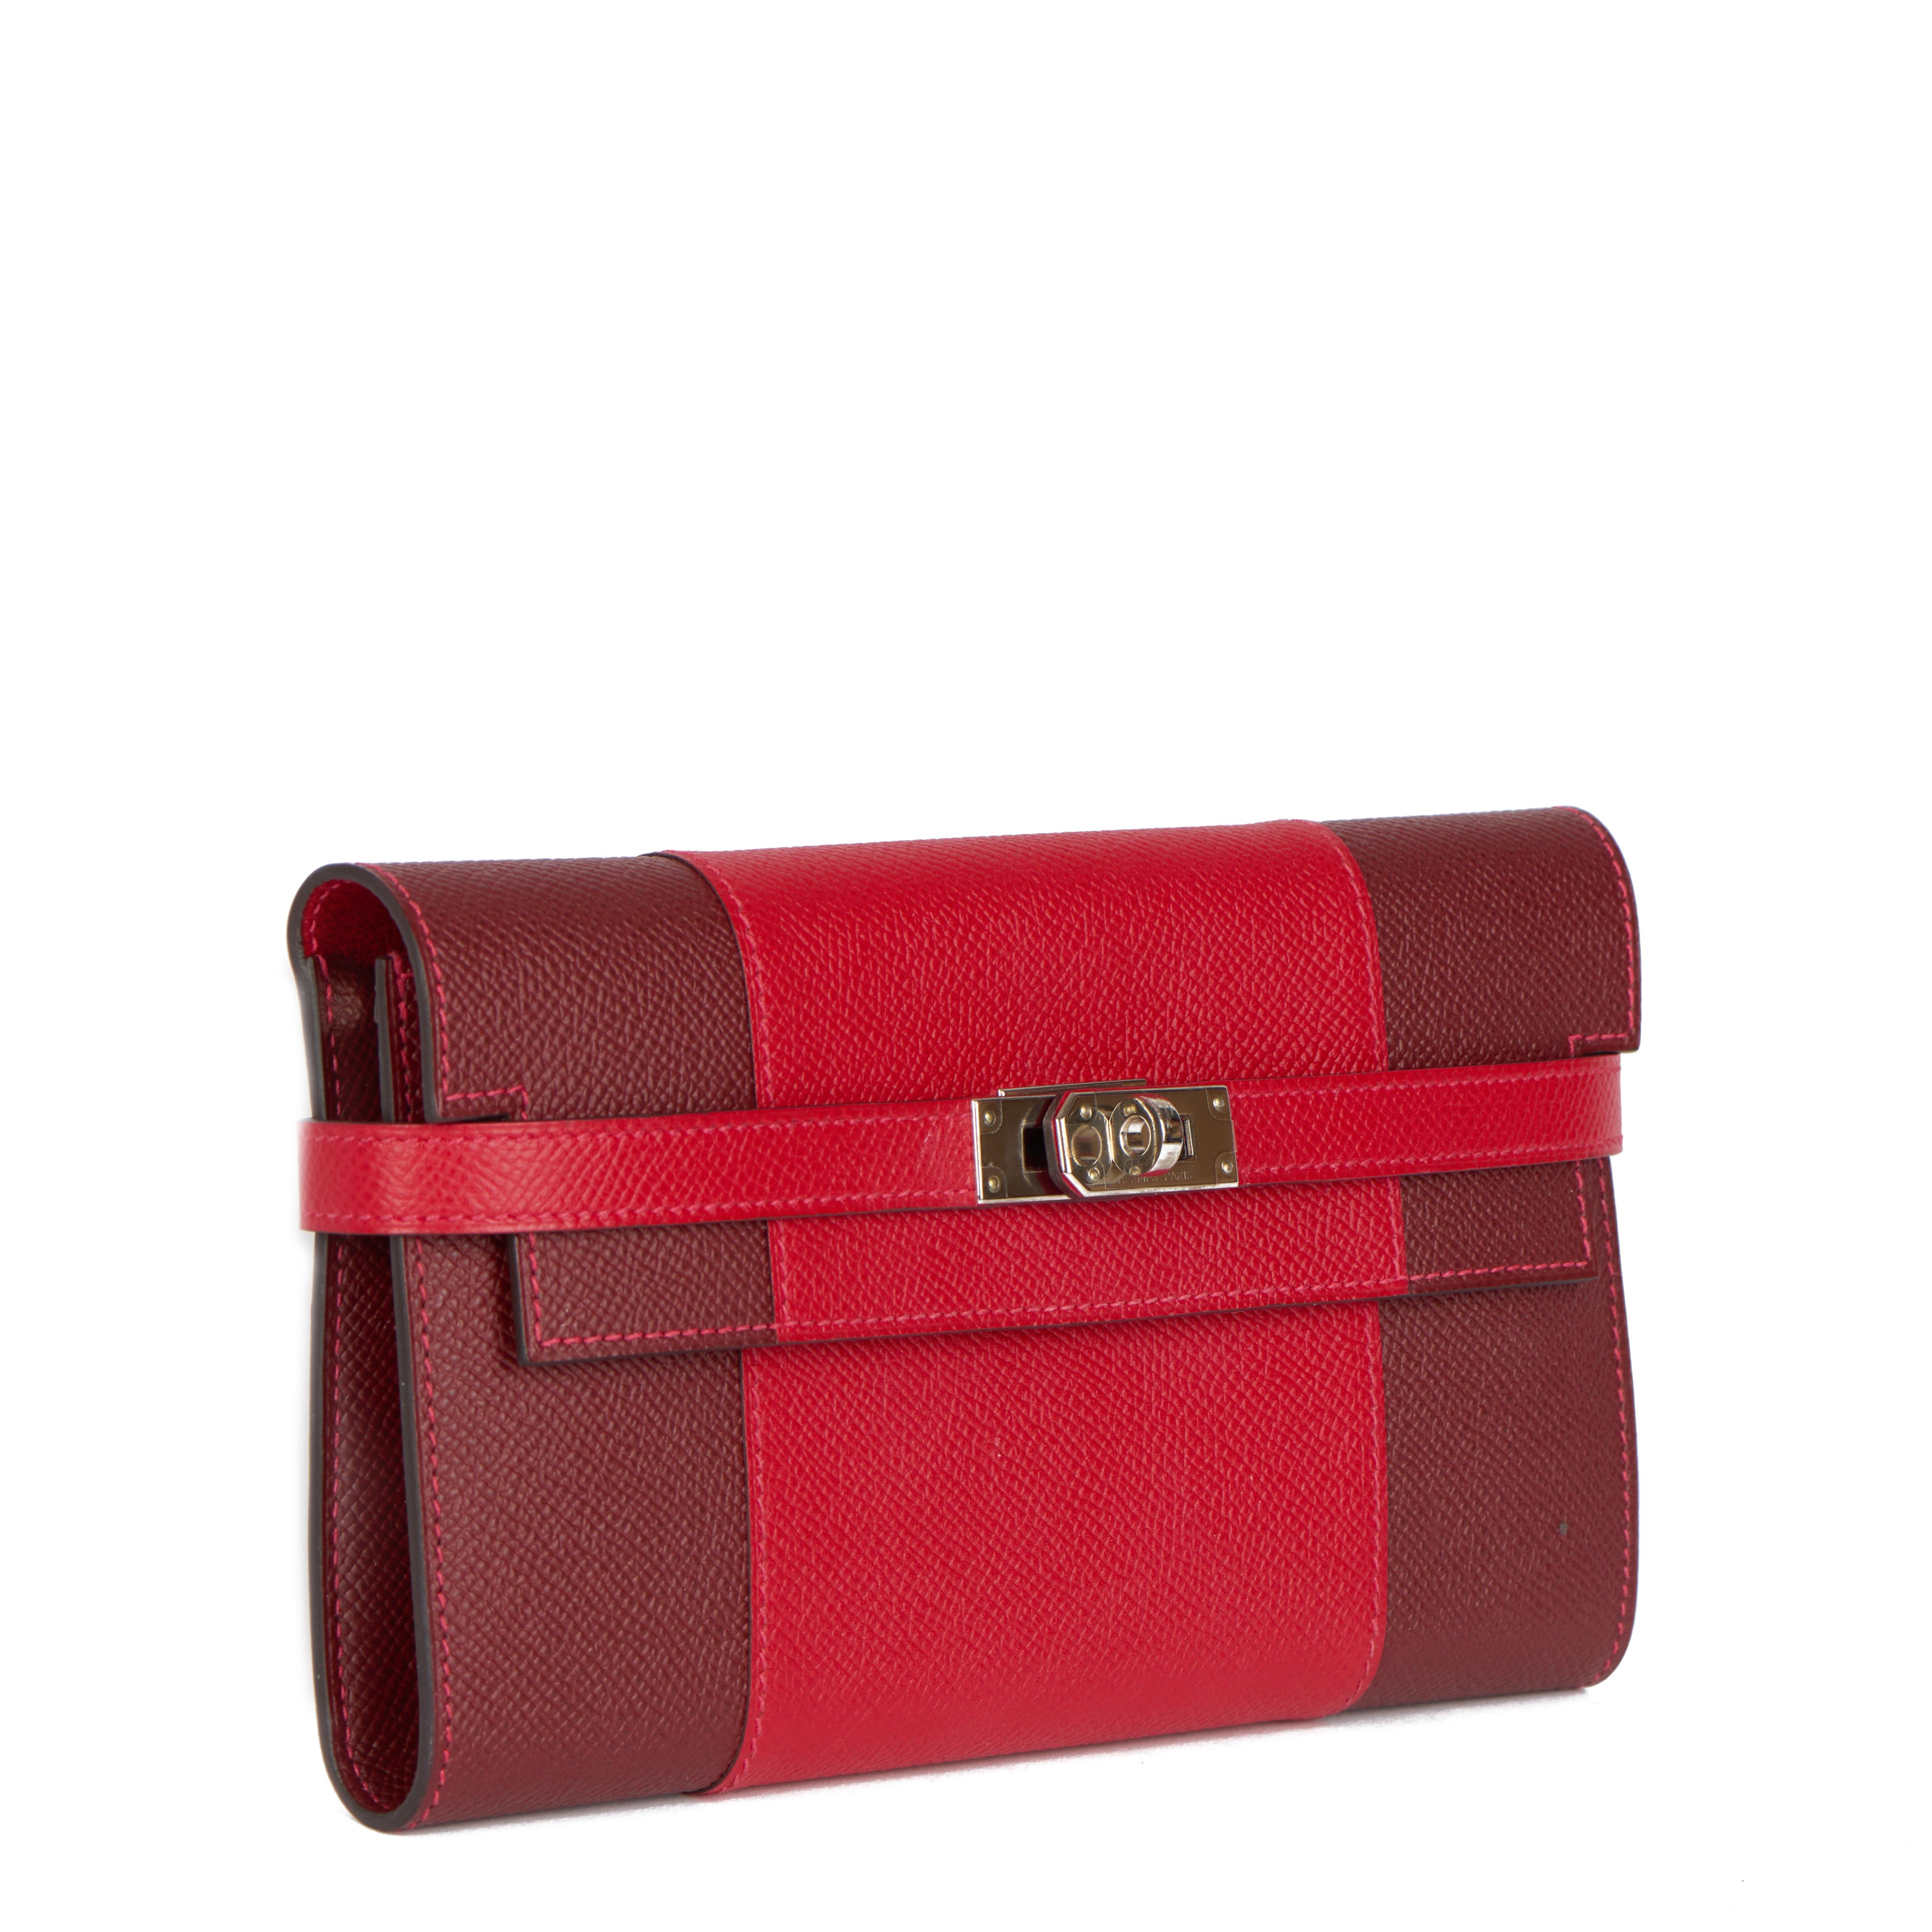 HERMÈS
Rouge Casque & Rough H Epsom Leather Flag Kelly Wallet

Serial Number: O
Age (Circa): X
Accompanied By: Hermes Box, Protective Felt, Harrods Receipt 
Authenticity Details: Date Stamp (Made in France)
Gender: Ladies
Type: Wallet

Colour: Rouge